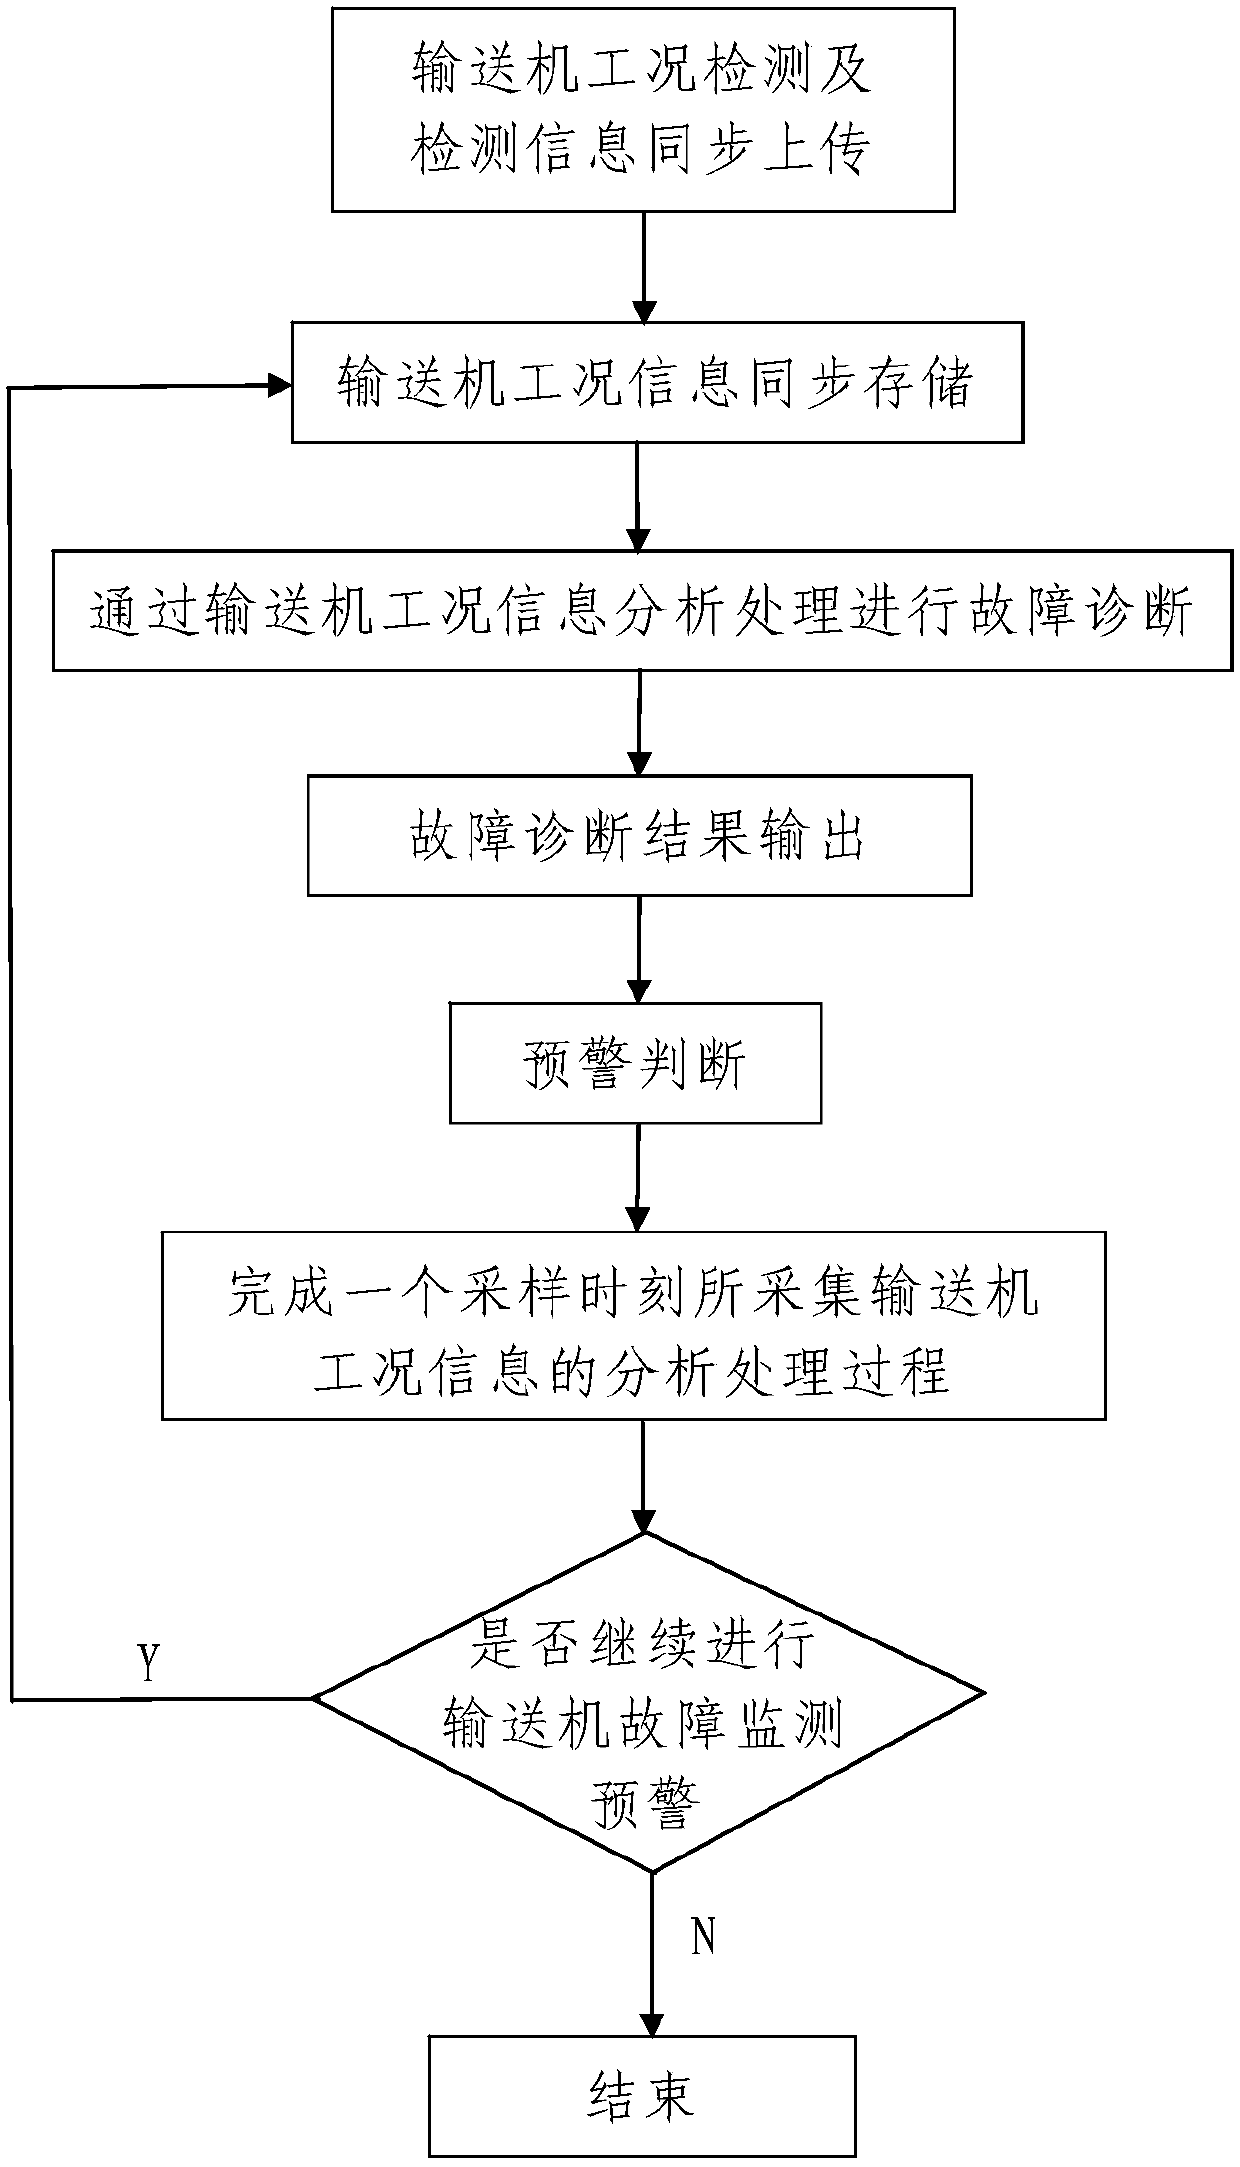 A mine belt conveyor fault monitoring and early warning system and method